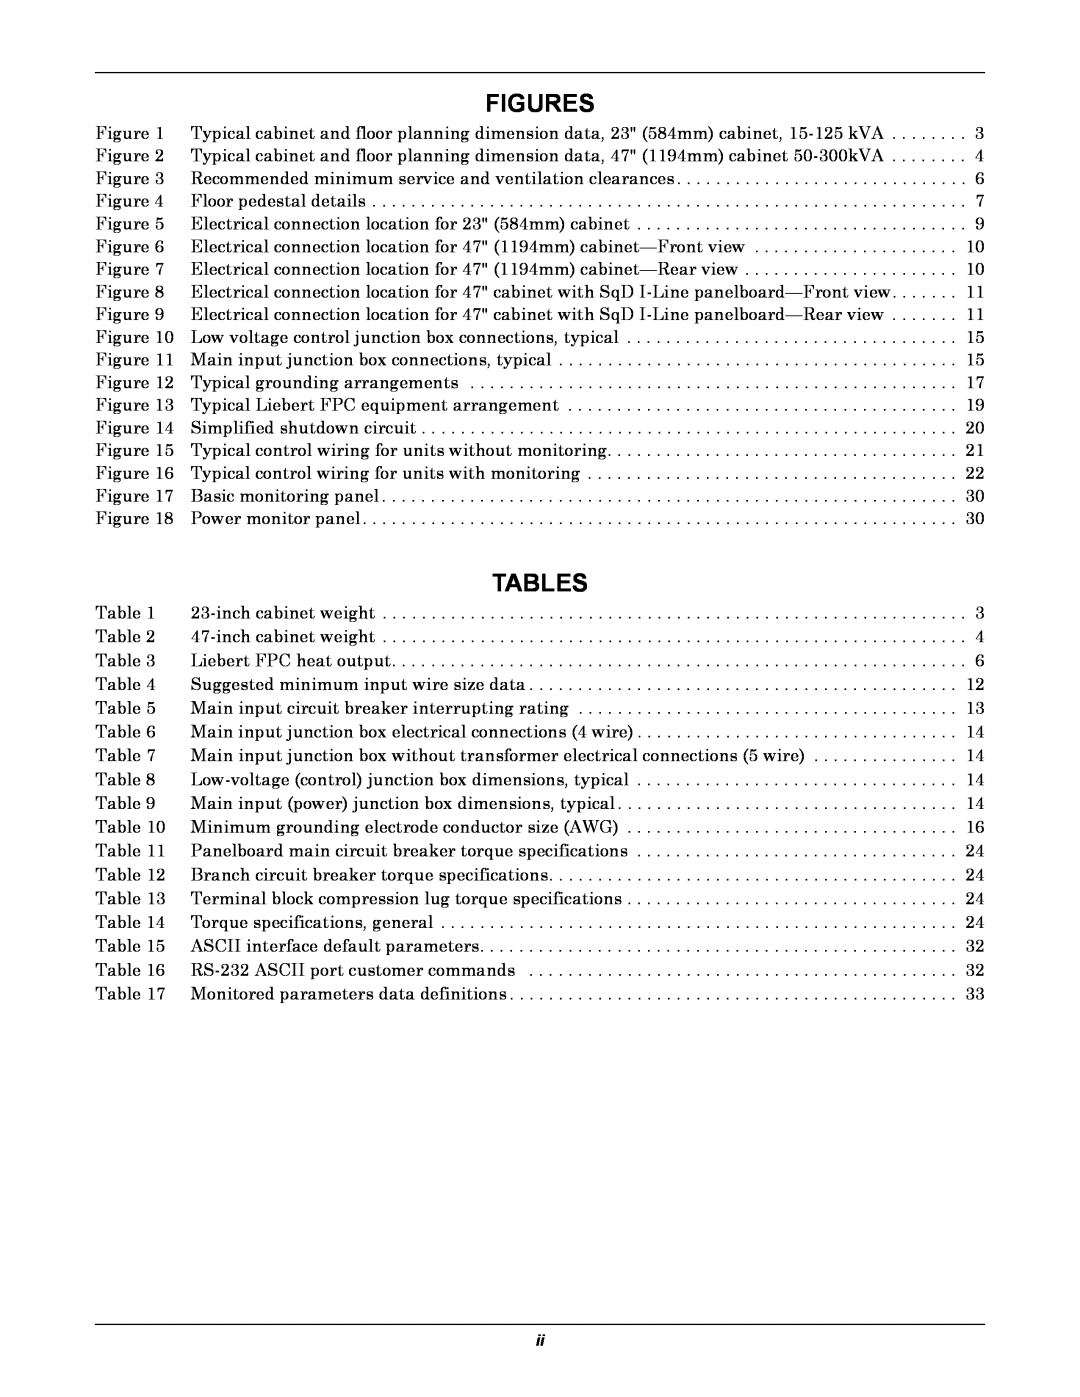 Emerson FPC user manual Figures, Tables 